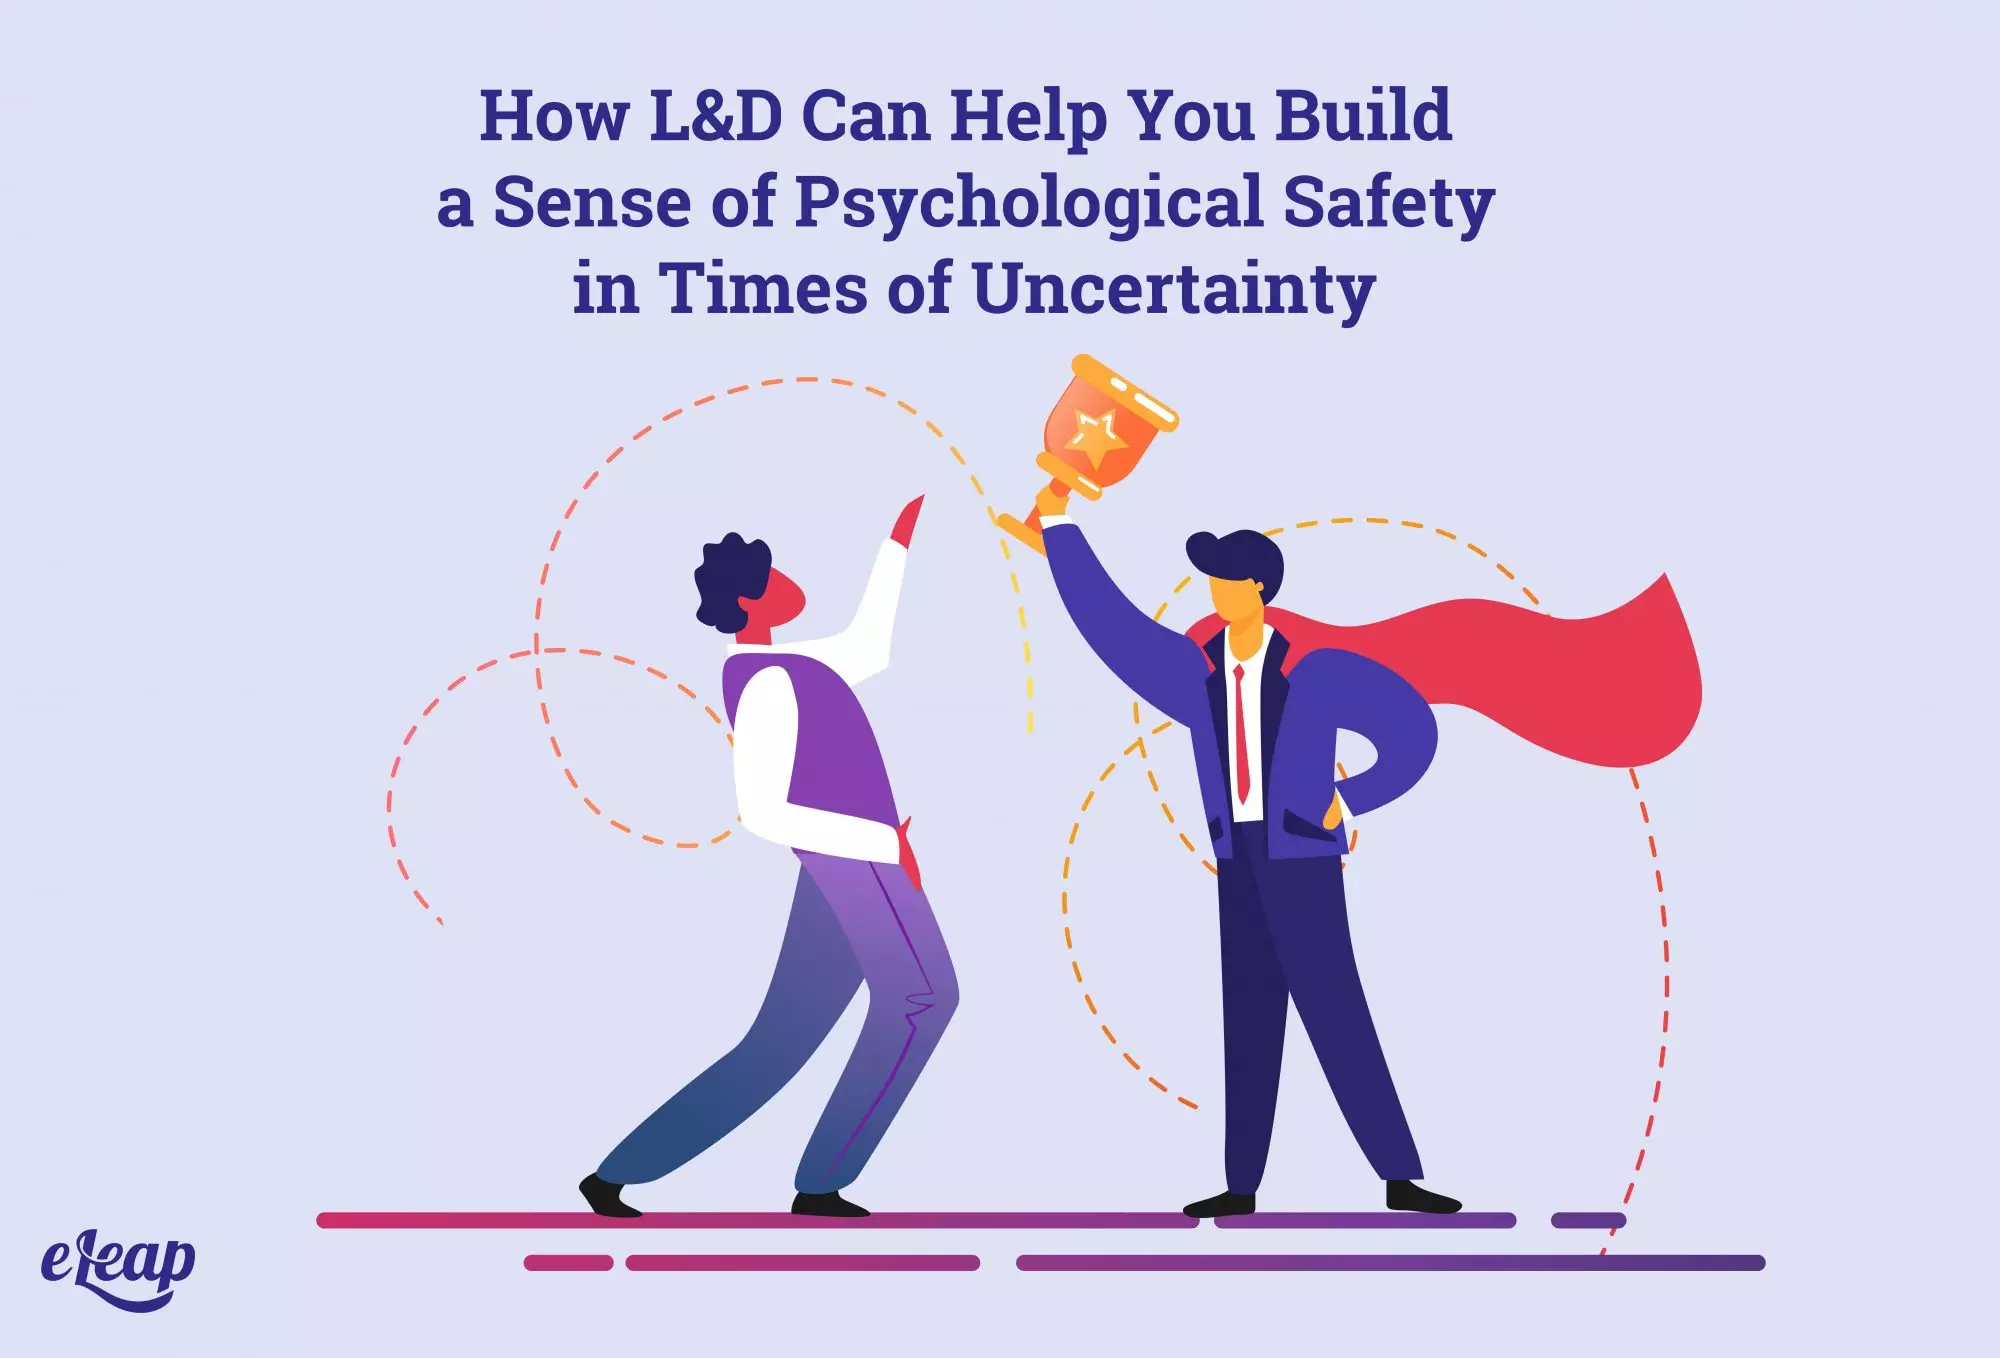 How L&D Can Help You Build a Sense of Psychological Safety in Times of Uncertainty